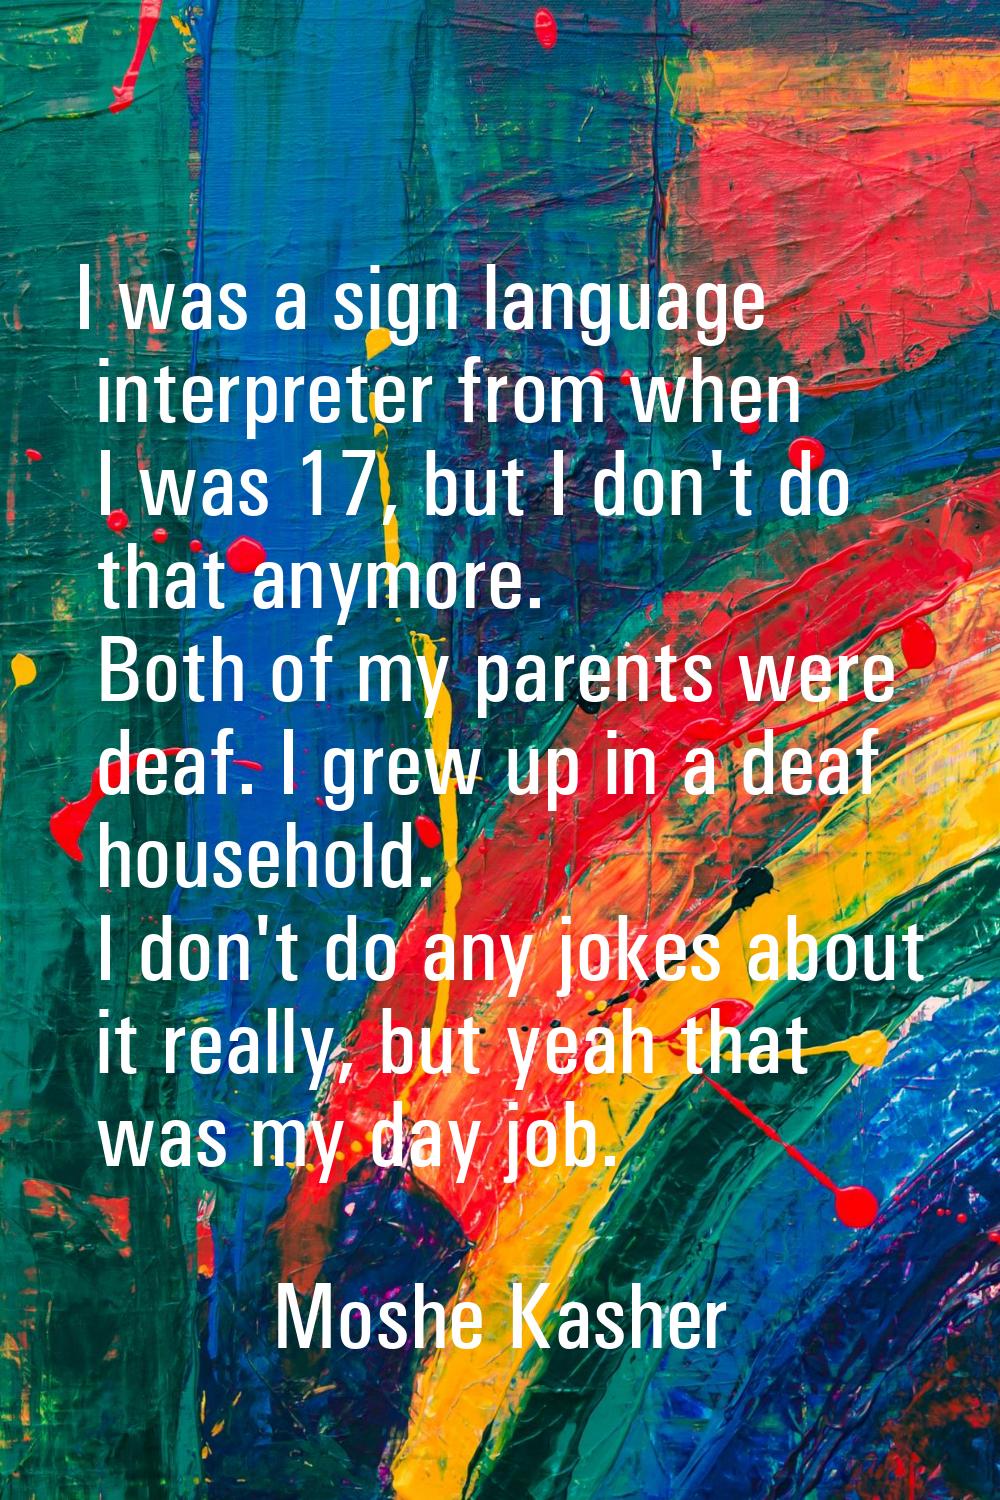 I was a sign language interpreter from when I was 17, but I don't do that anymore. Both of my paren